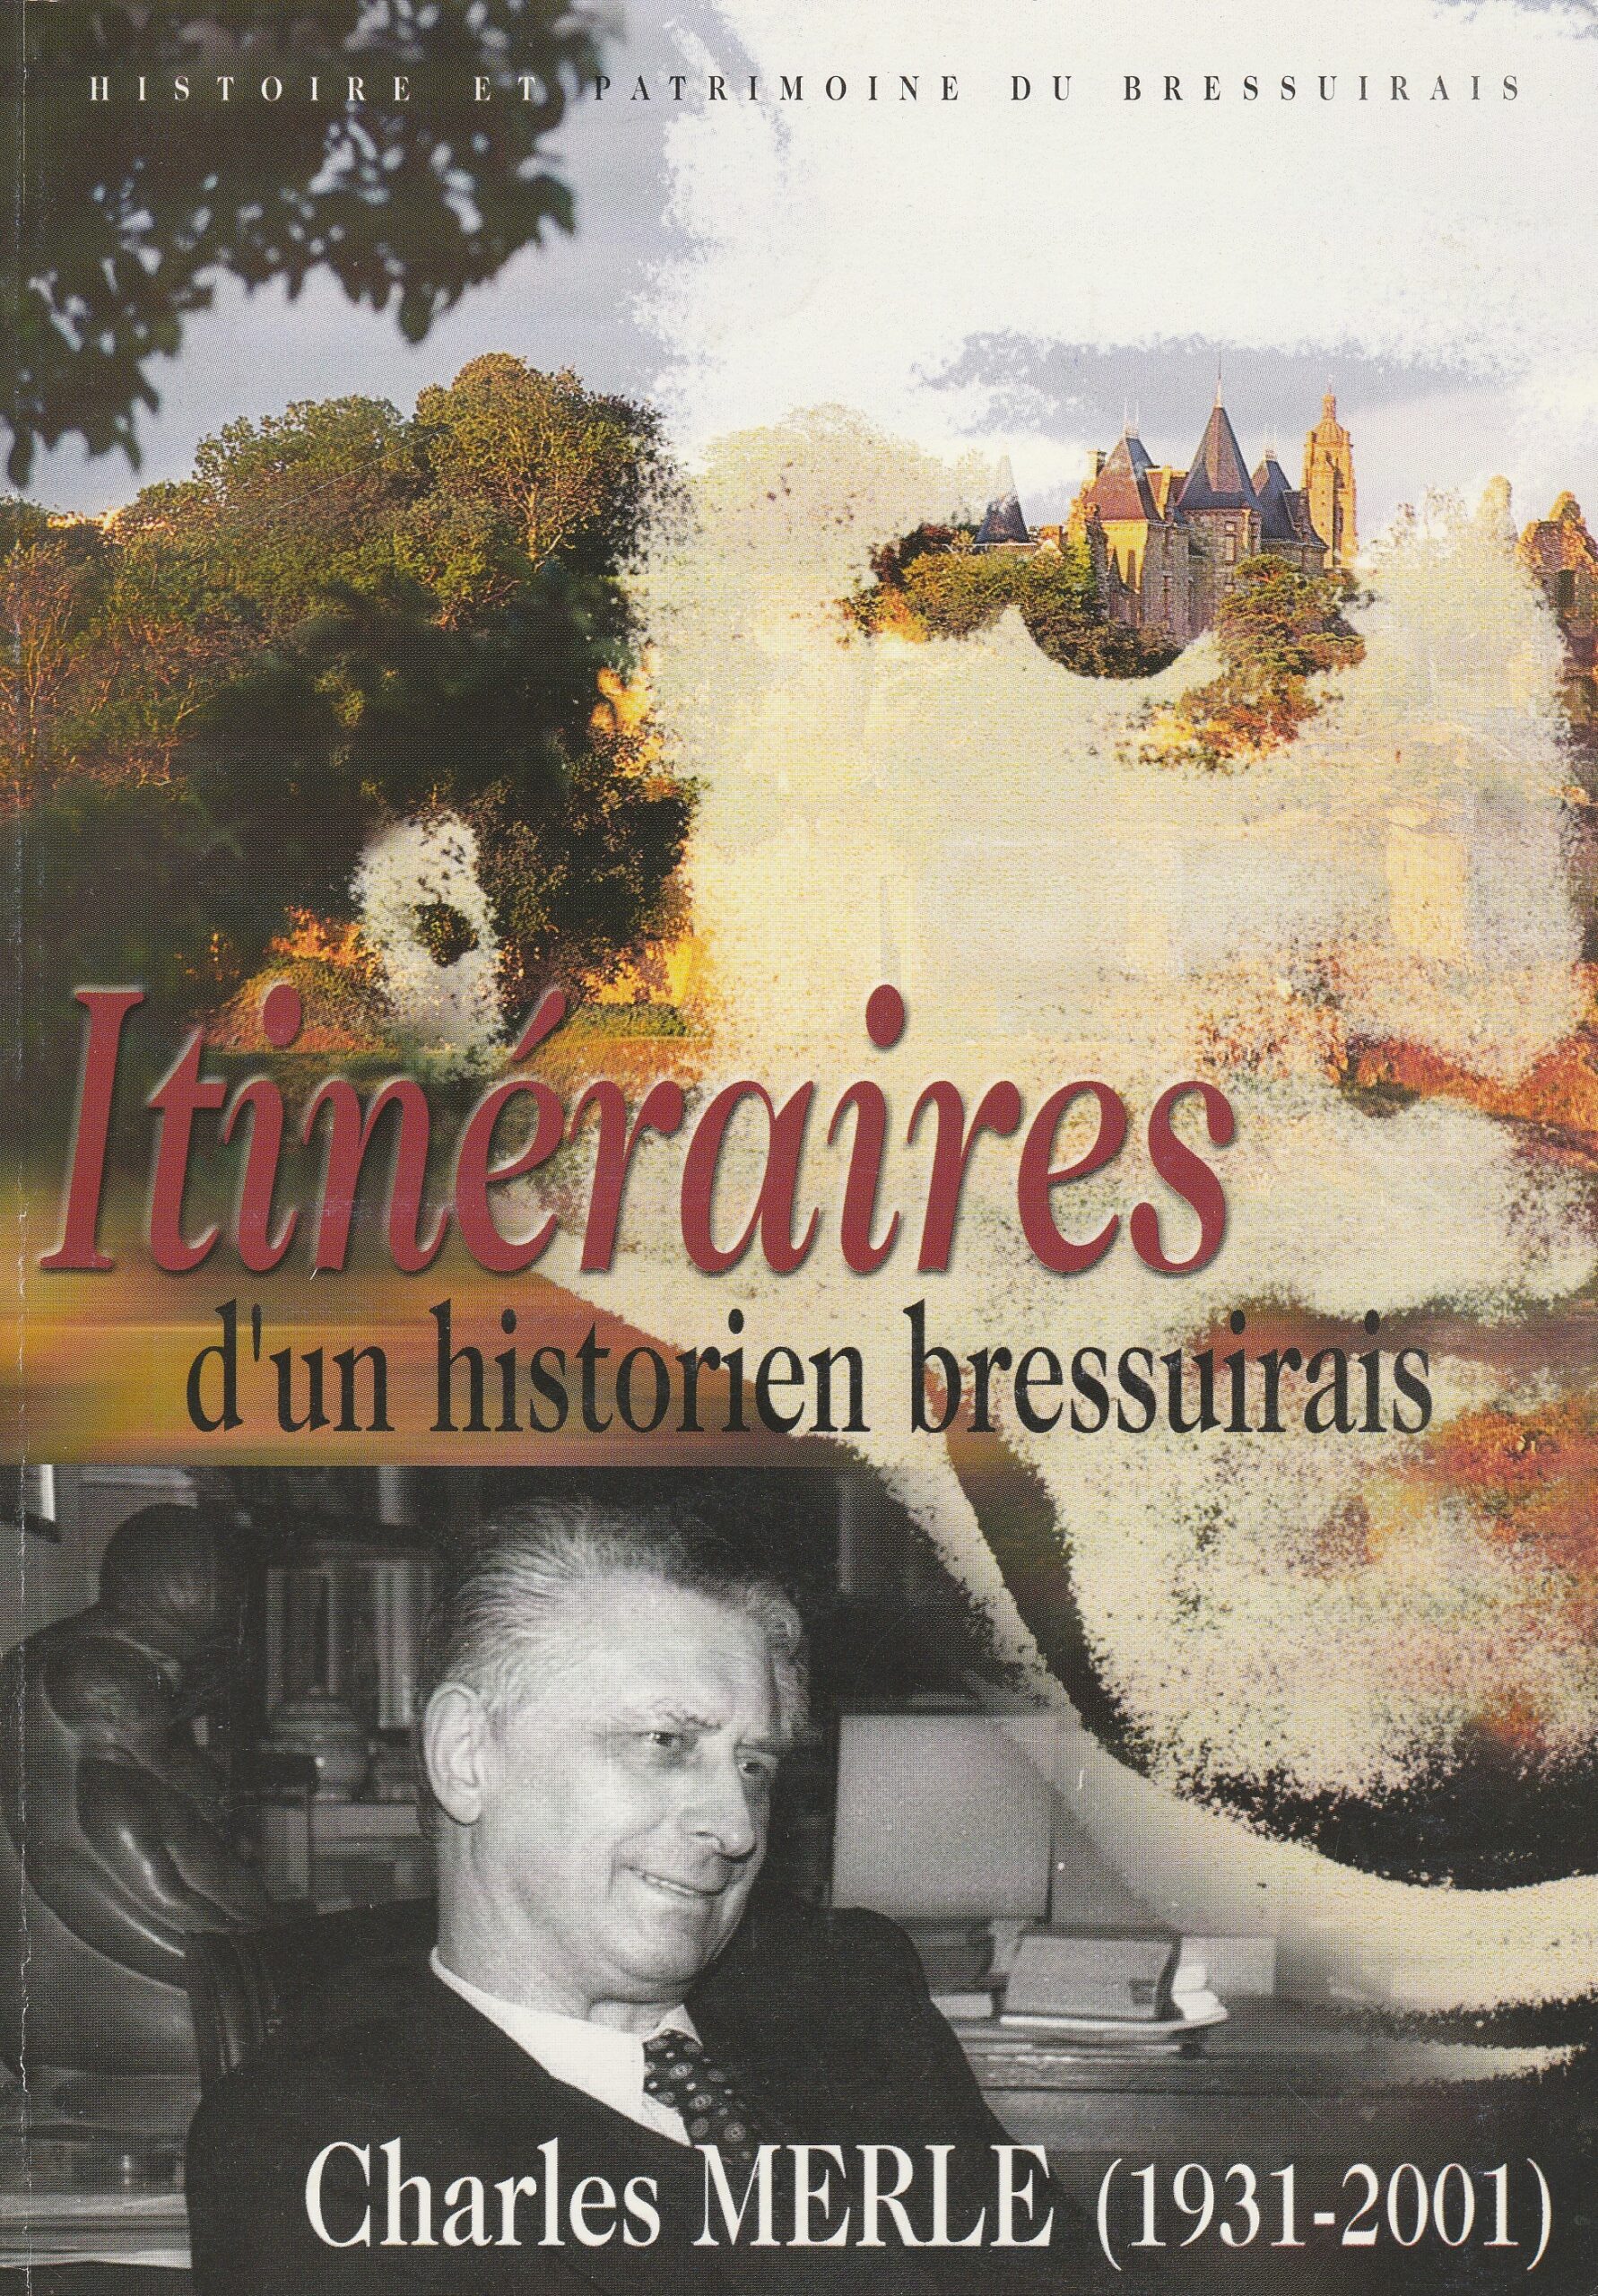 You are currently viewing Itinéraires d’un historien bressuirais, Charles MERLE (1931-2001)